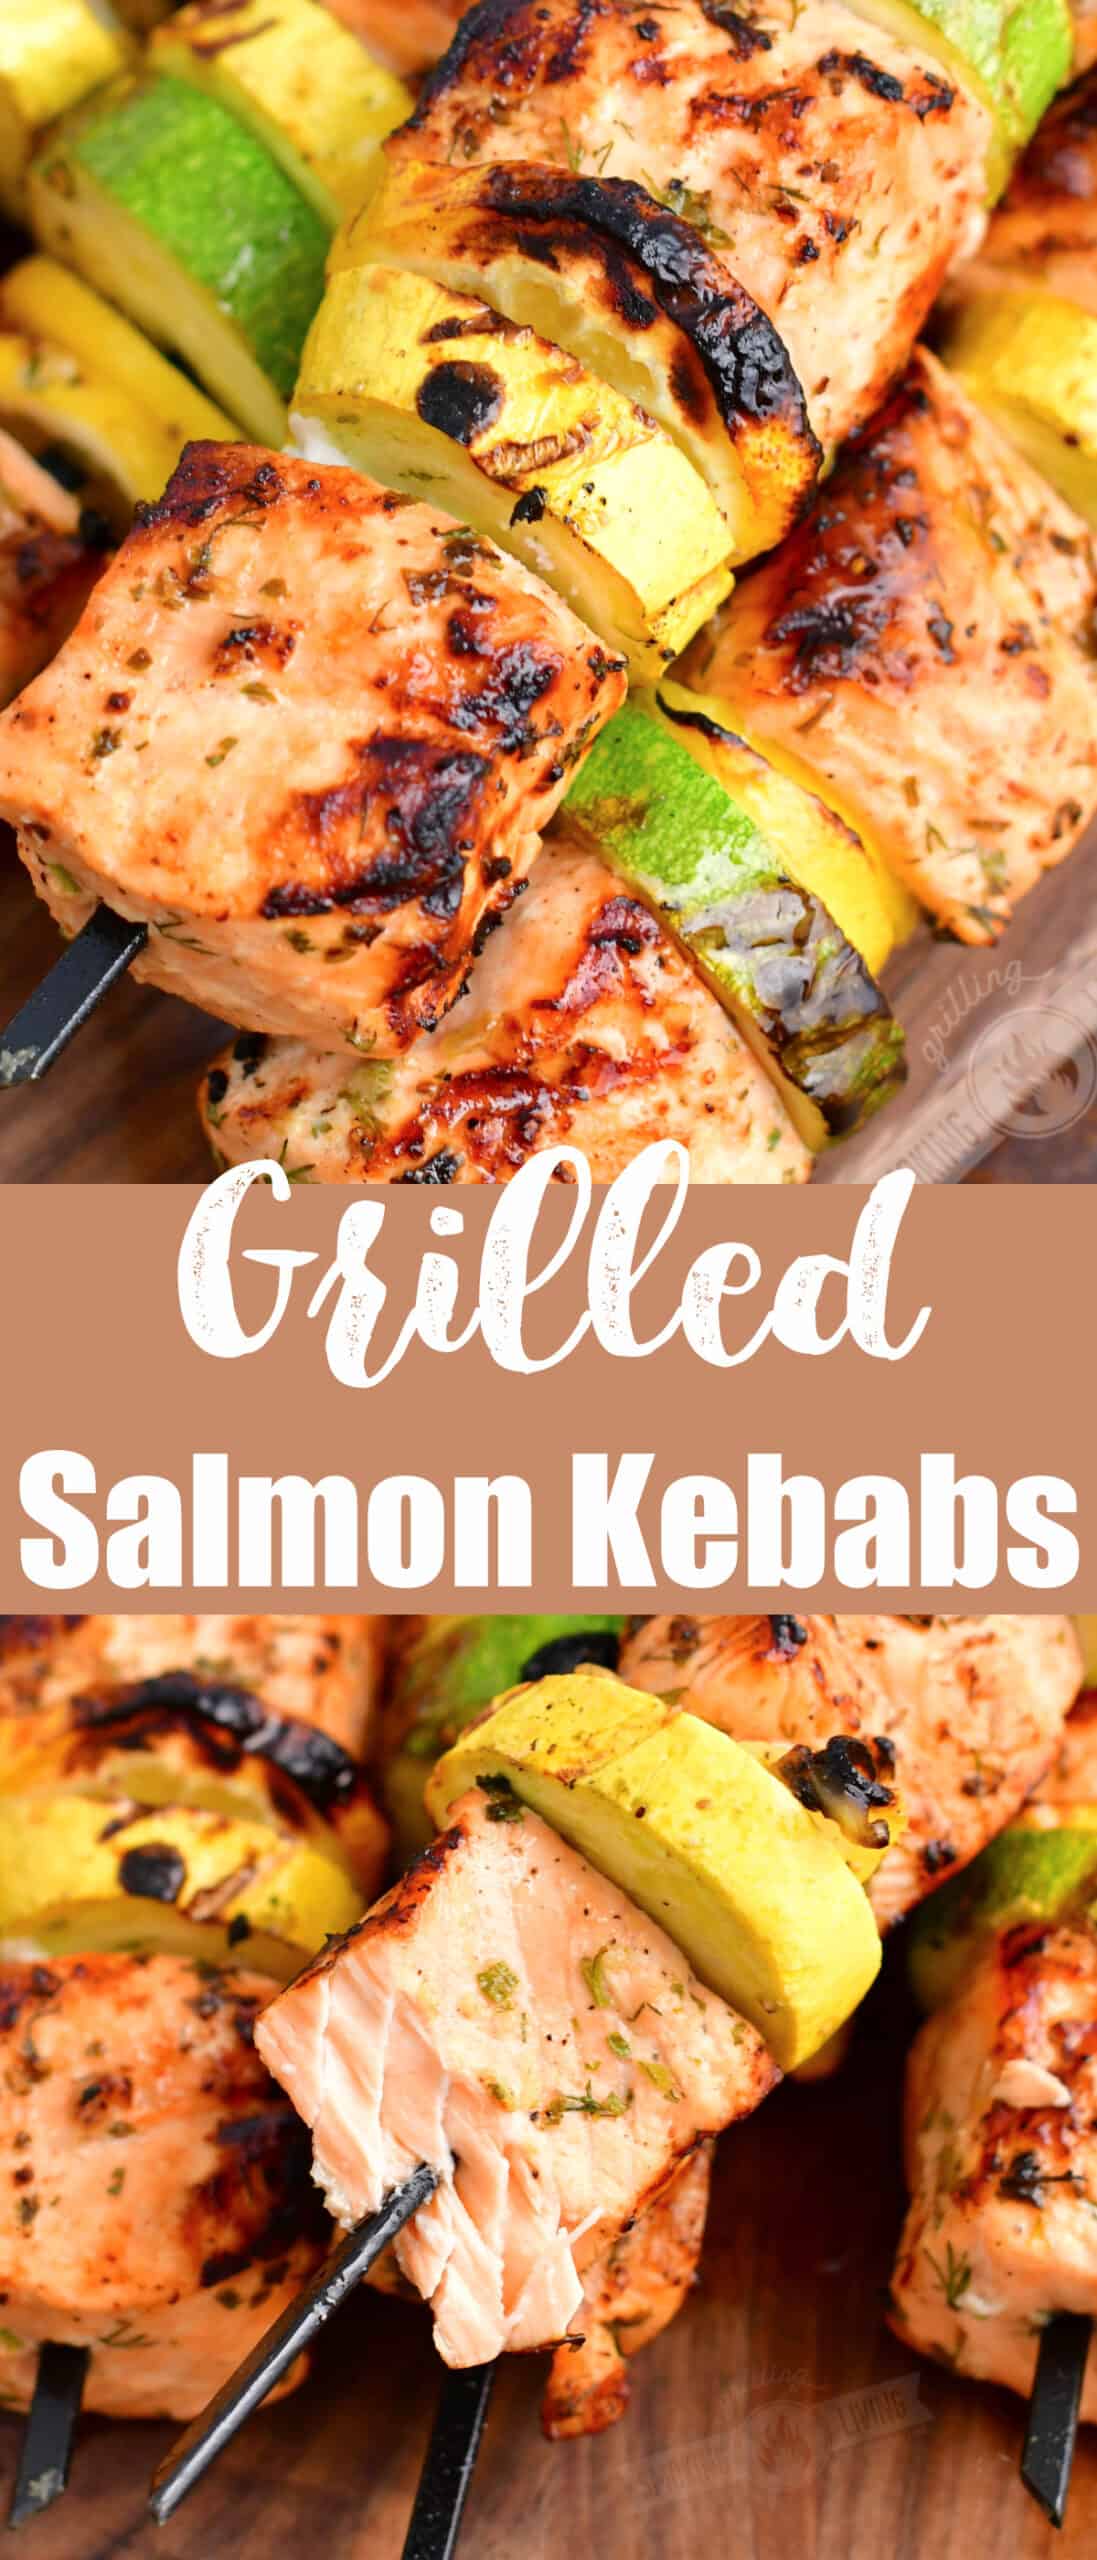 title collage of two images close up of grilled salmon and vegetables